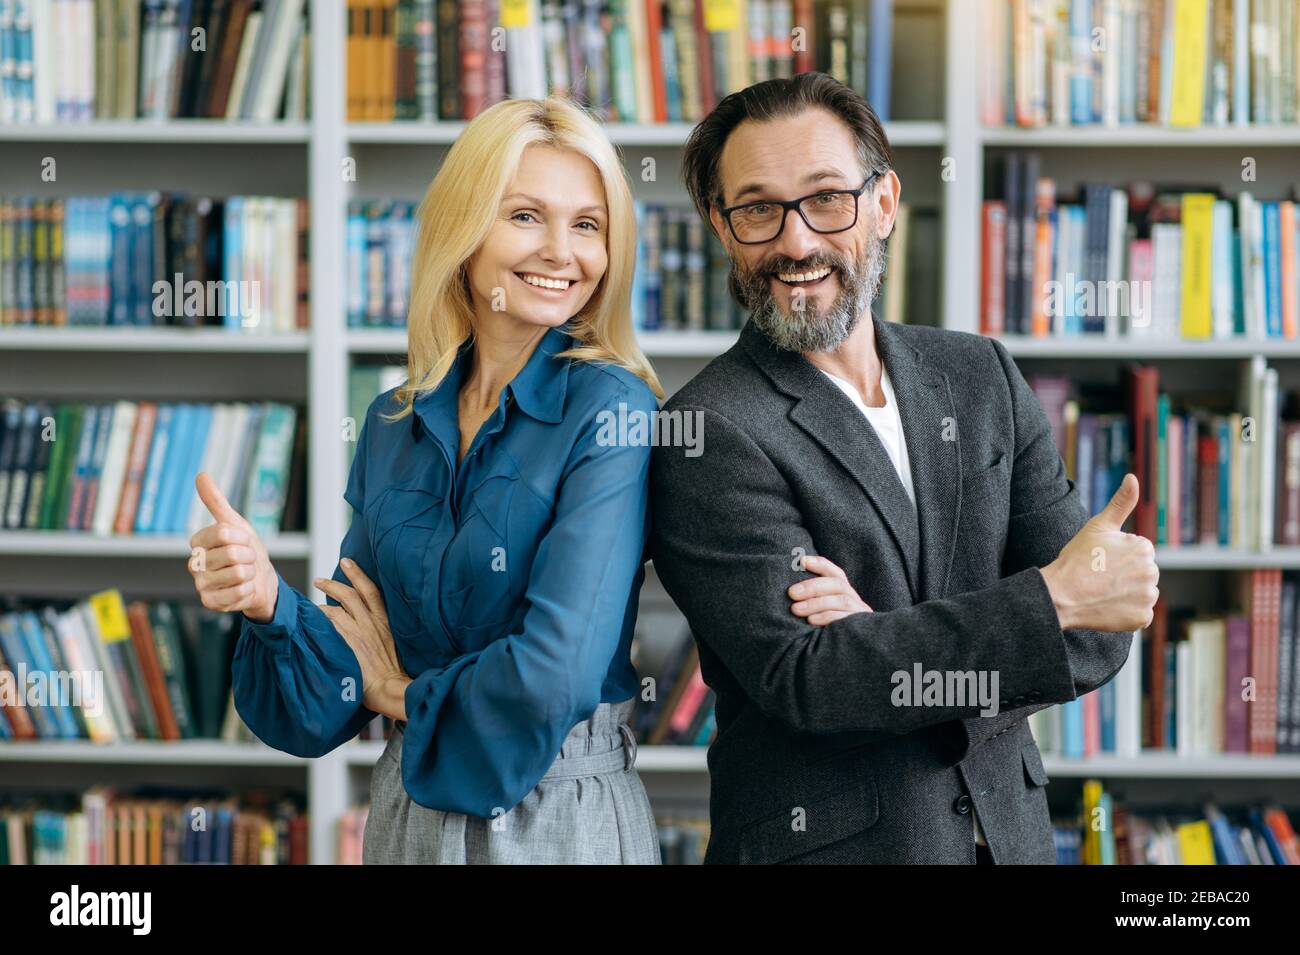 Successful happy business people in formal wear at the workplace. Mature confident male and female colleagues look directly at the camera, smiling, teamwork concept Stock Photo